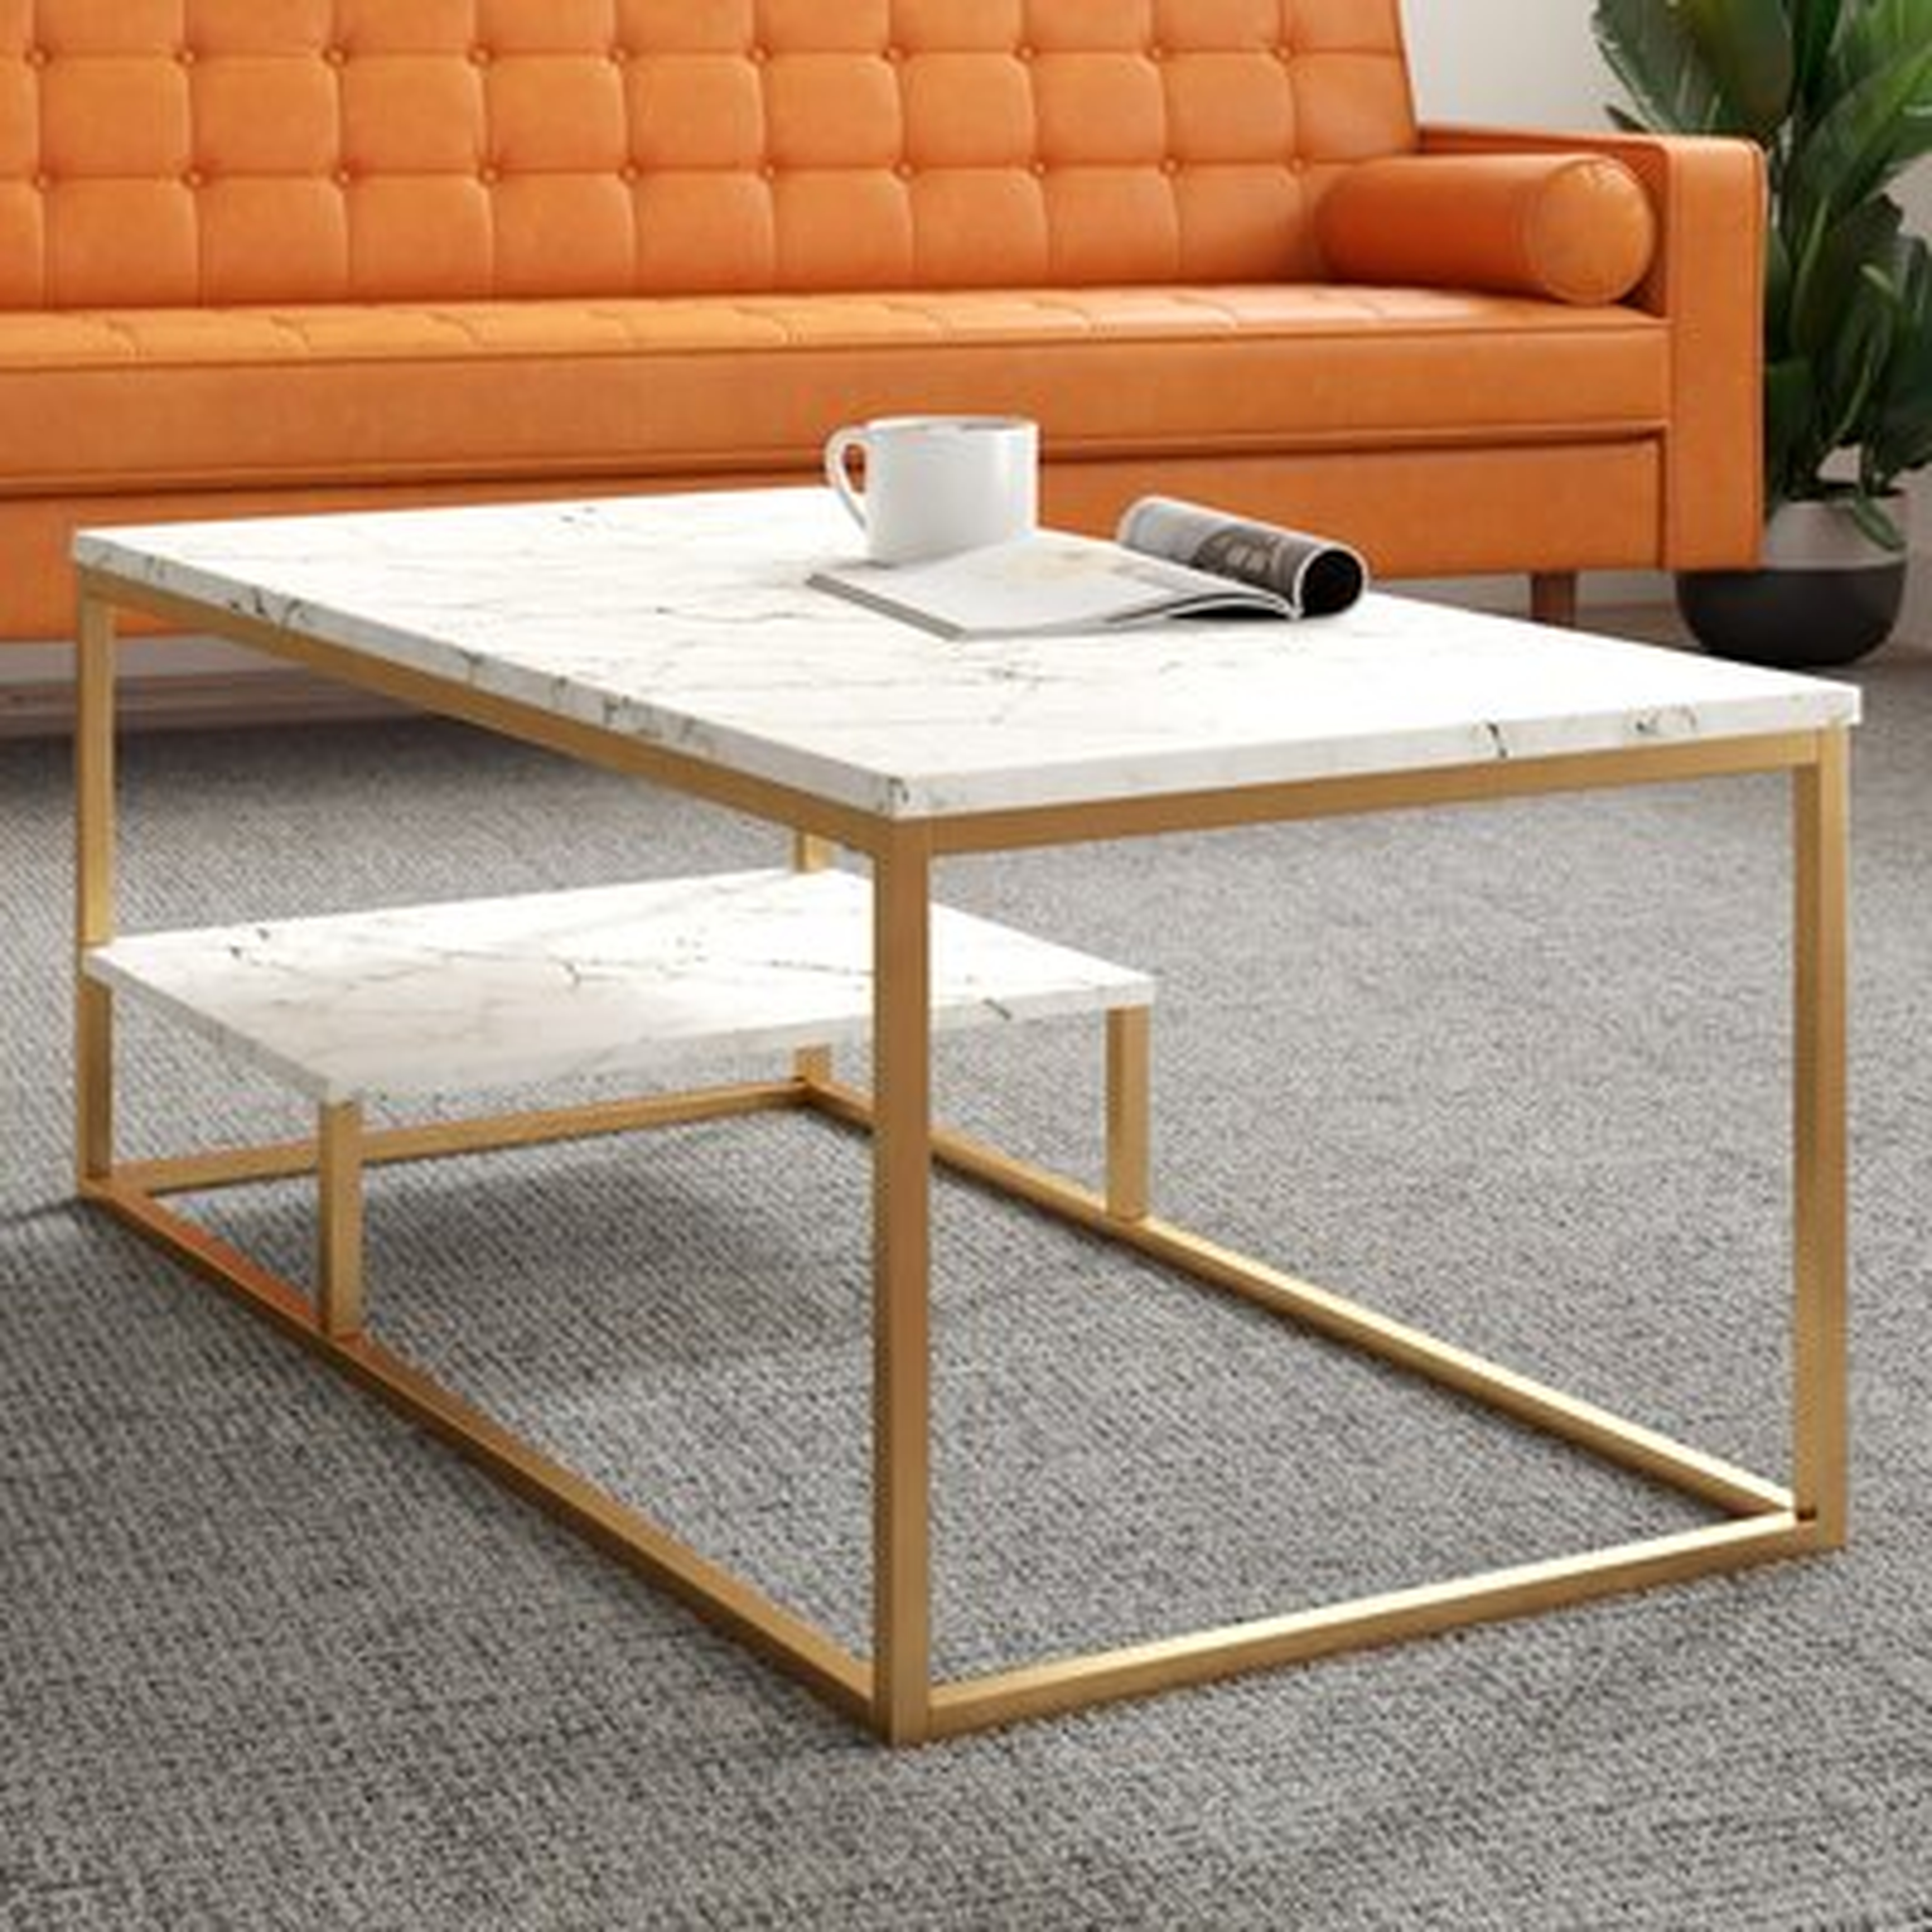 Carbone Coffee Table with Storage - AllModern